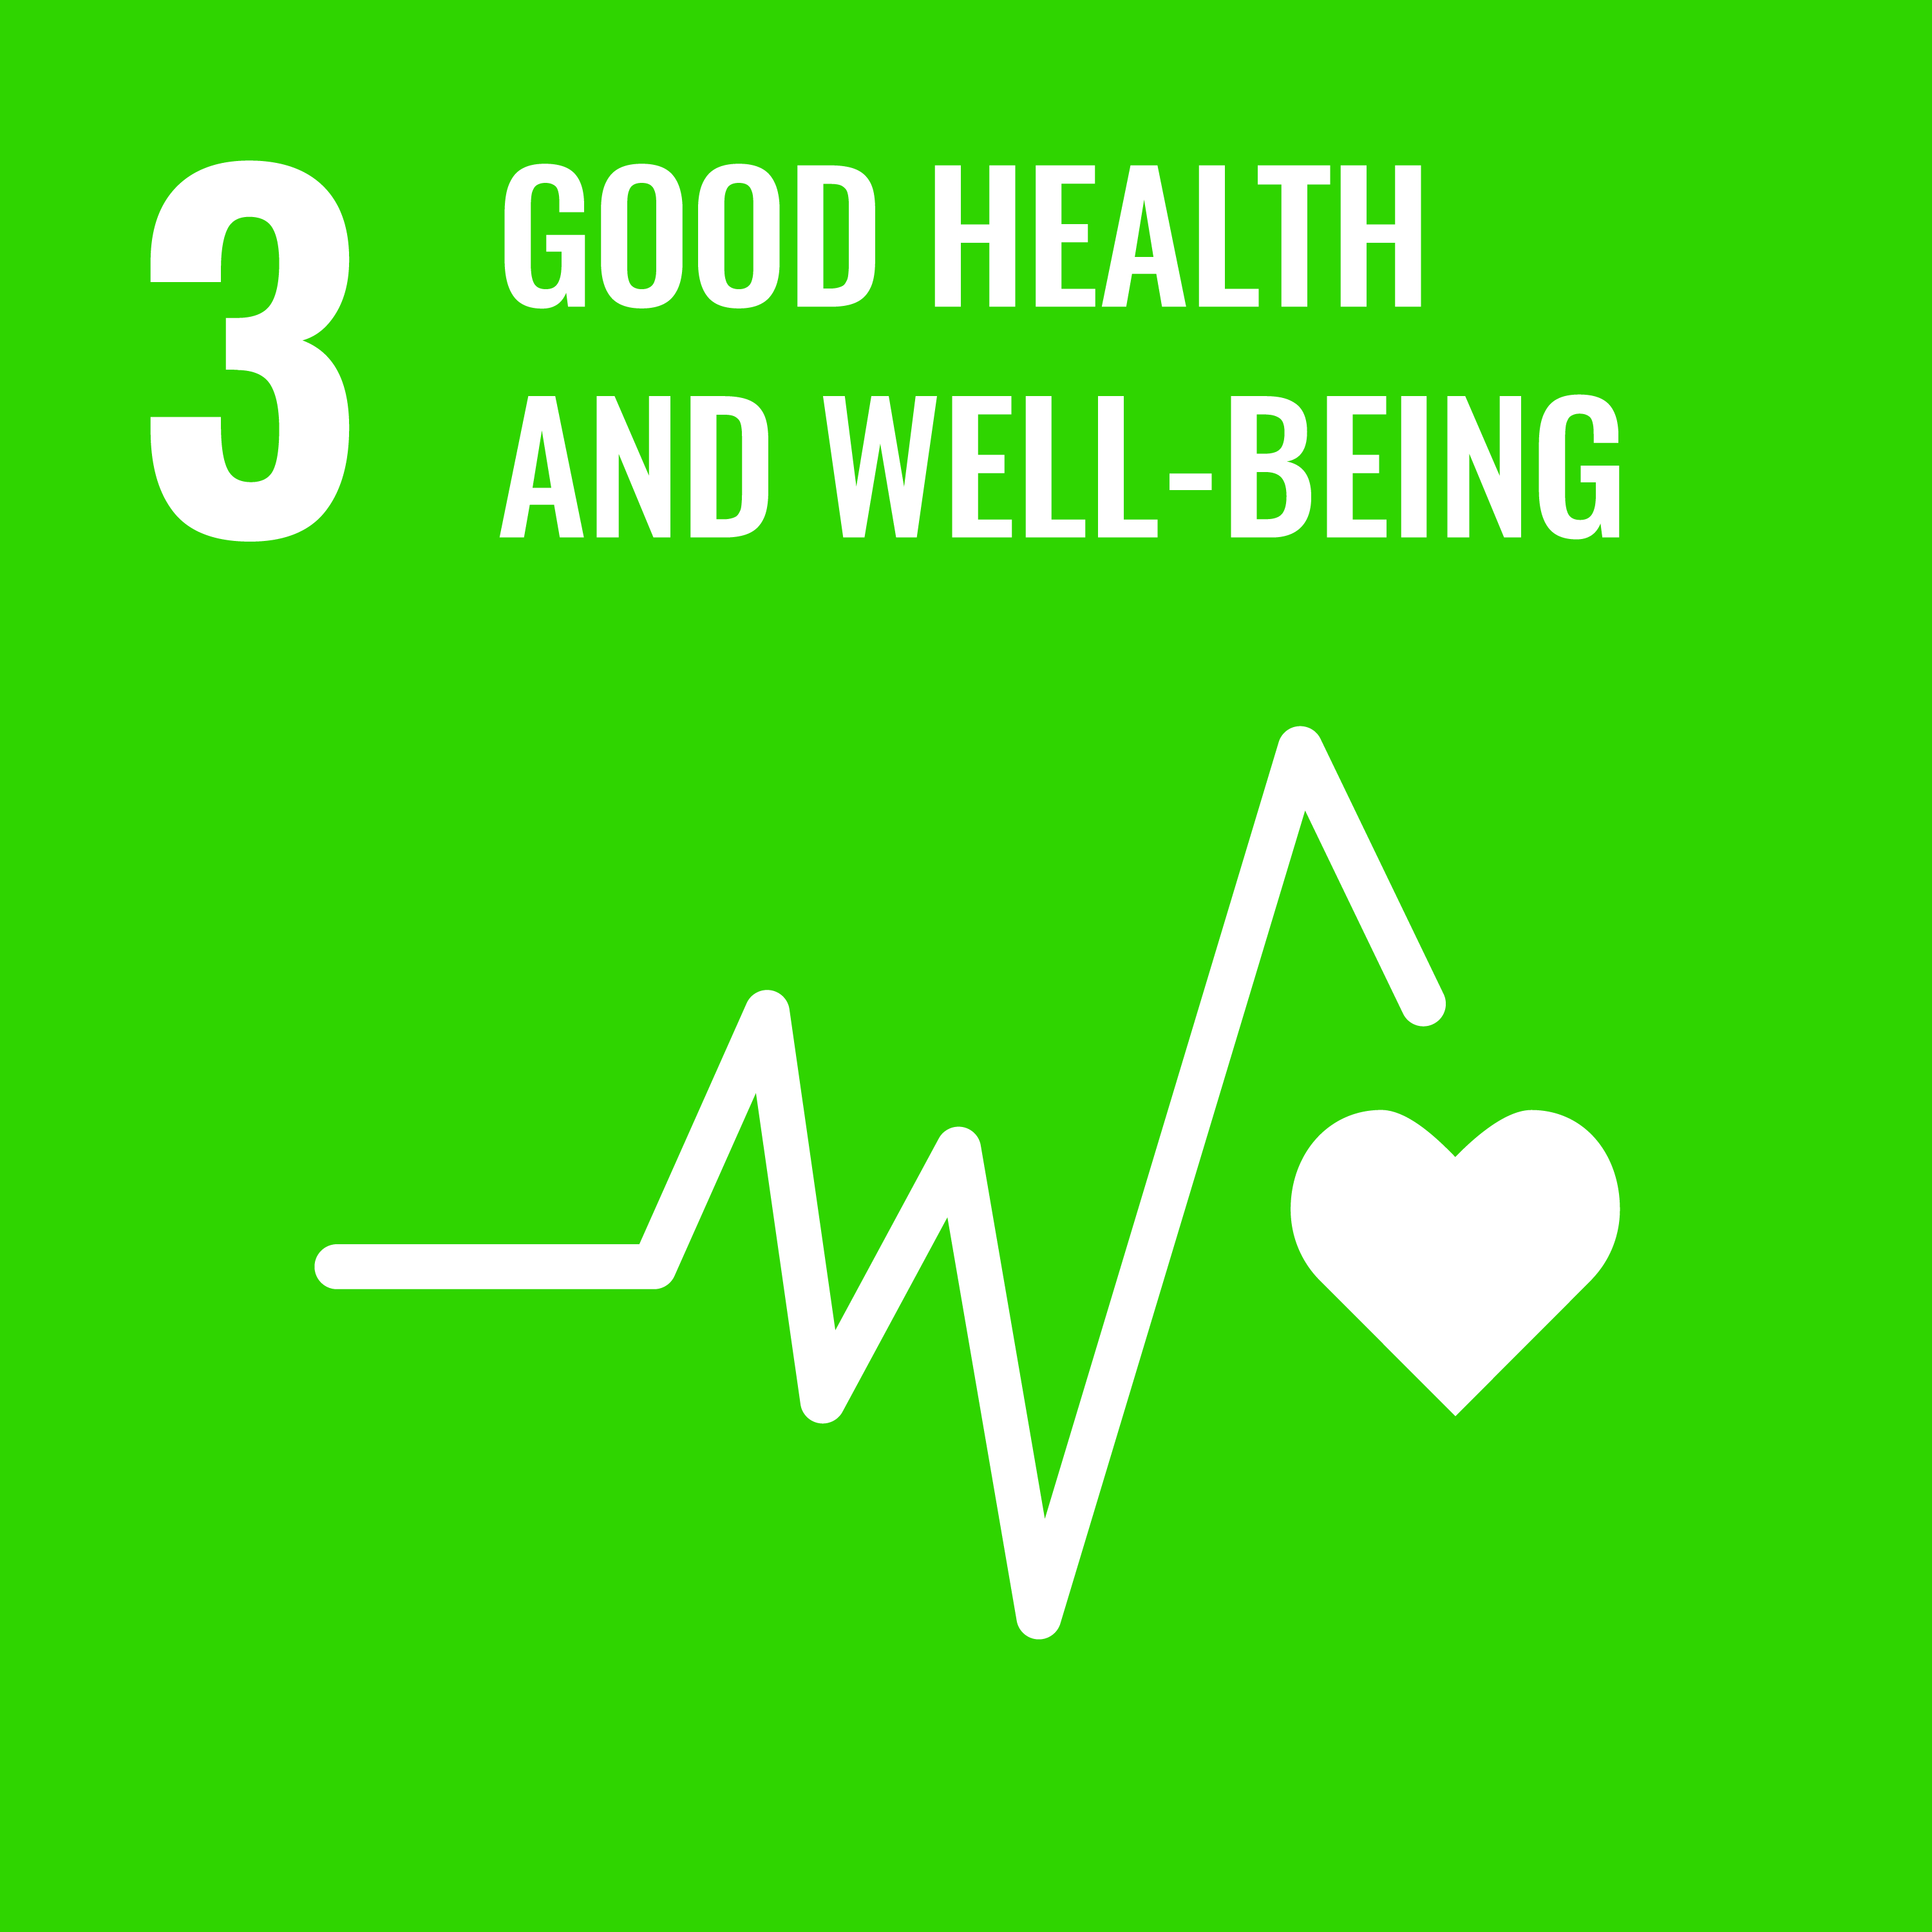 A green icon depicting a heart pulse and the text "3: Good health and well-being"